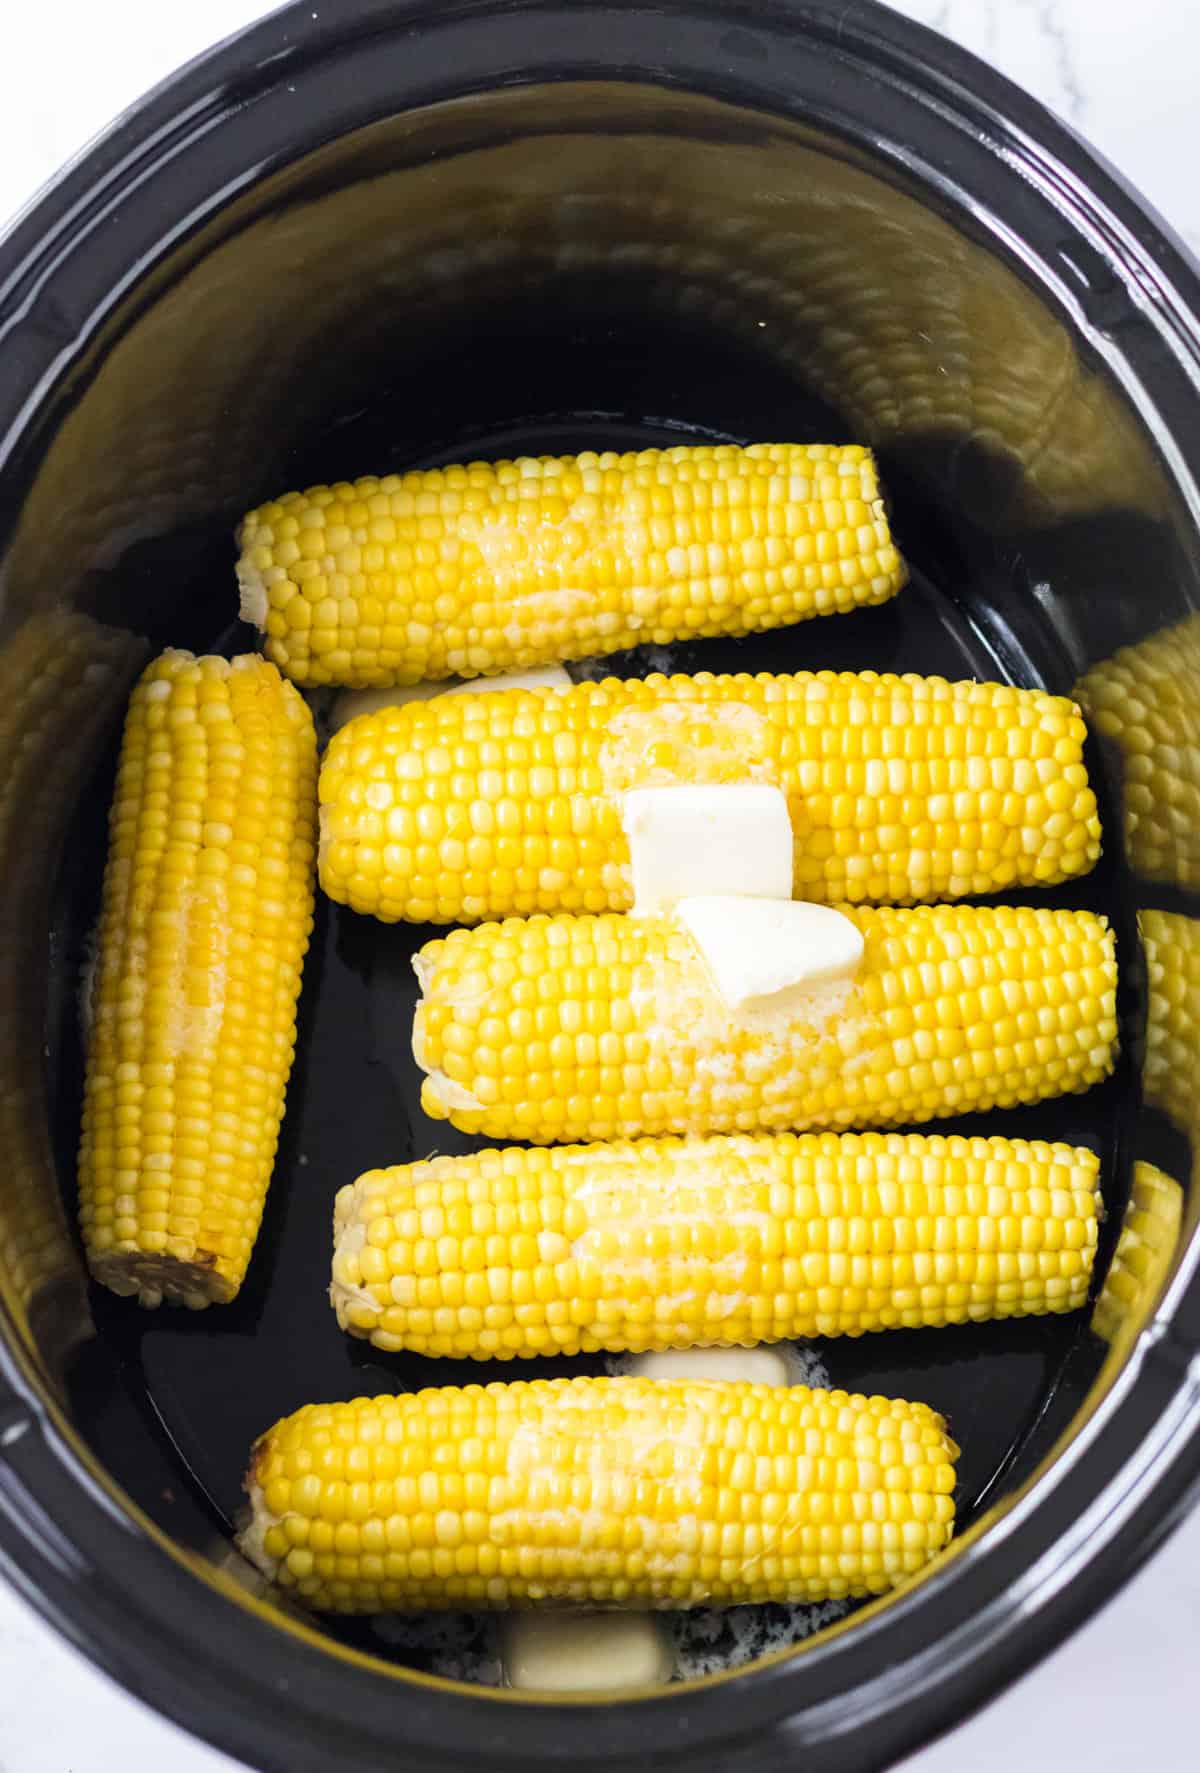 Butter melting on top of corn in crock pot.